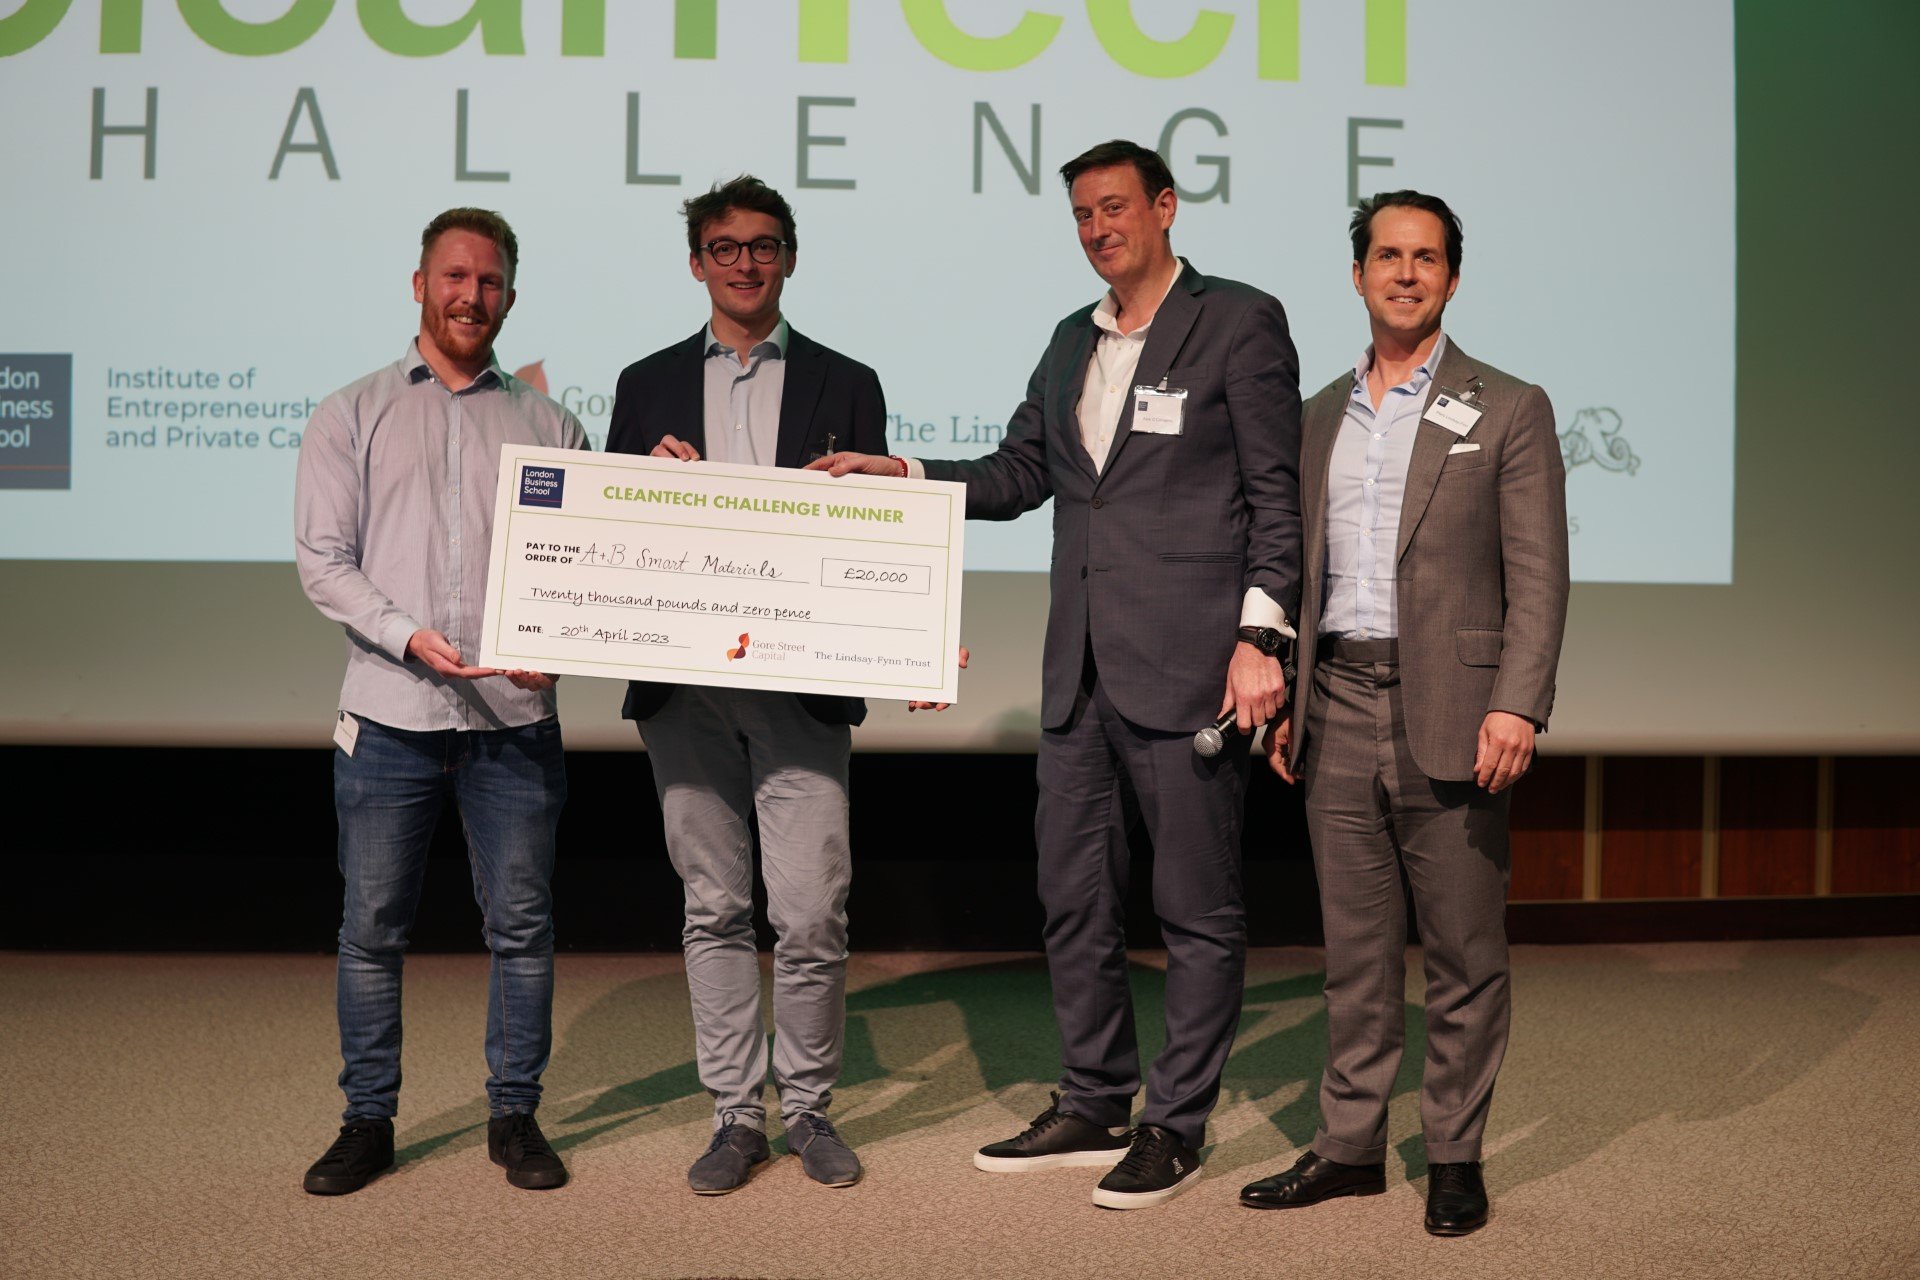 Driving innovation through the CleanTech Challenge